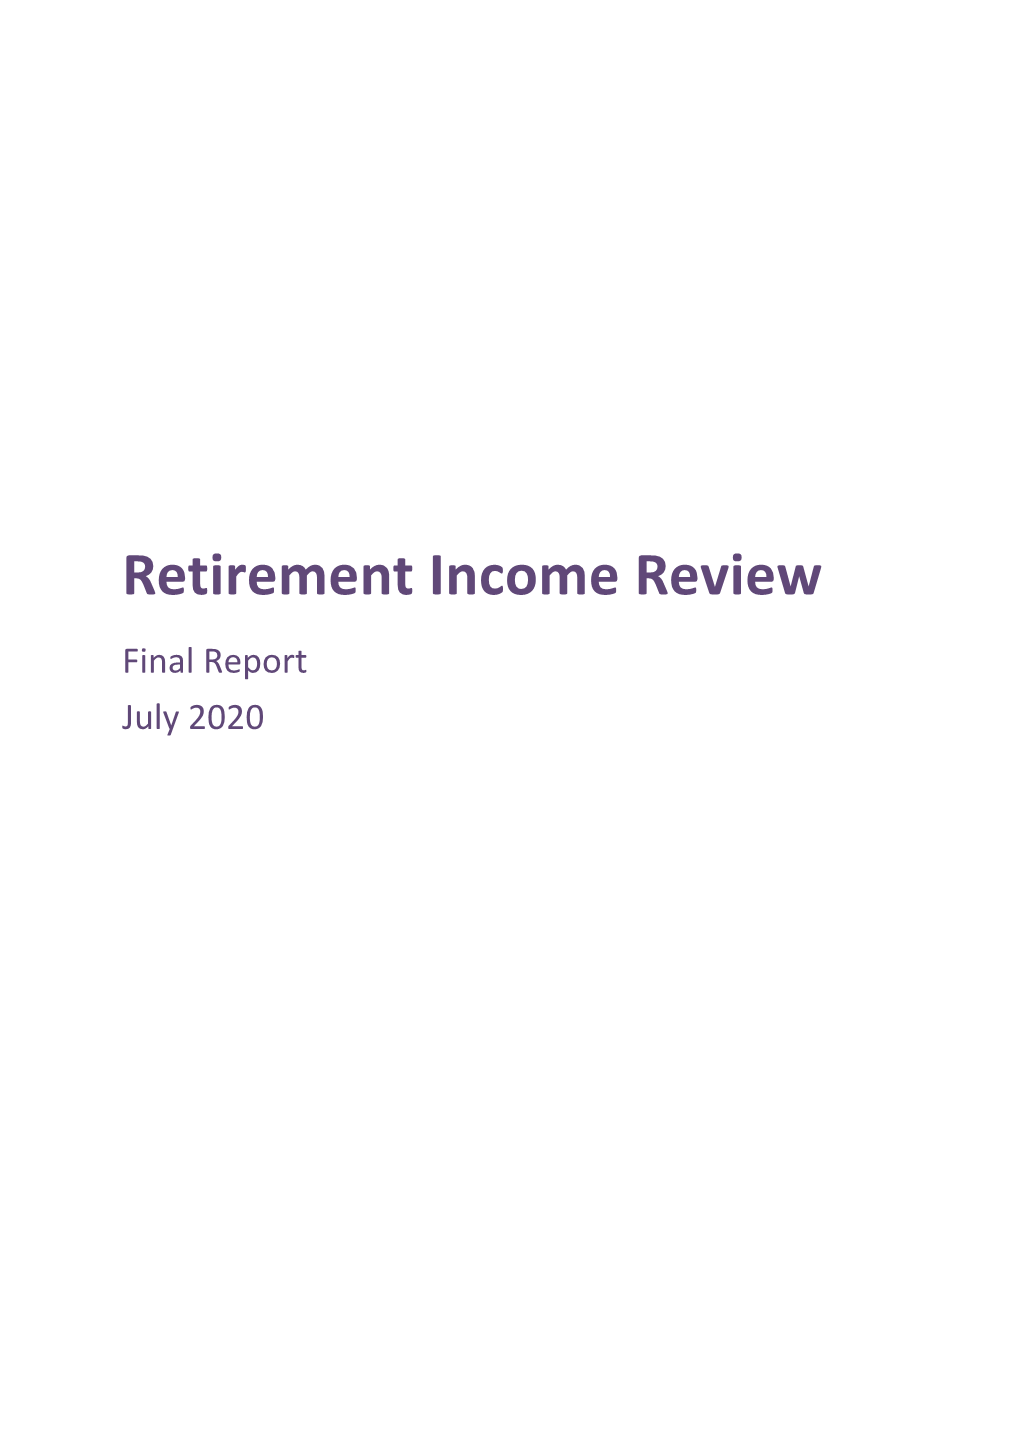 Retirement Income Review Final Report July 2020